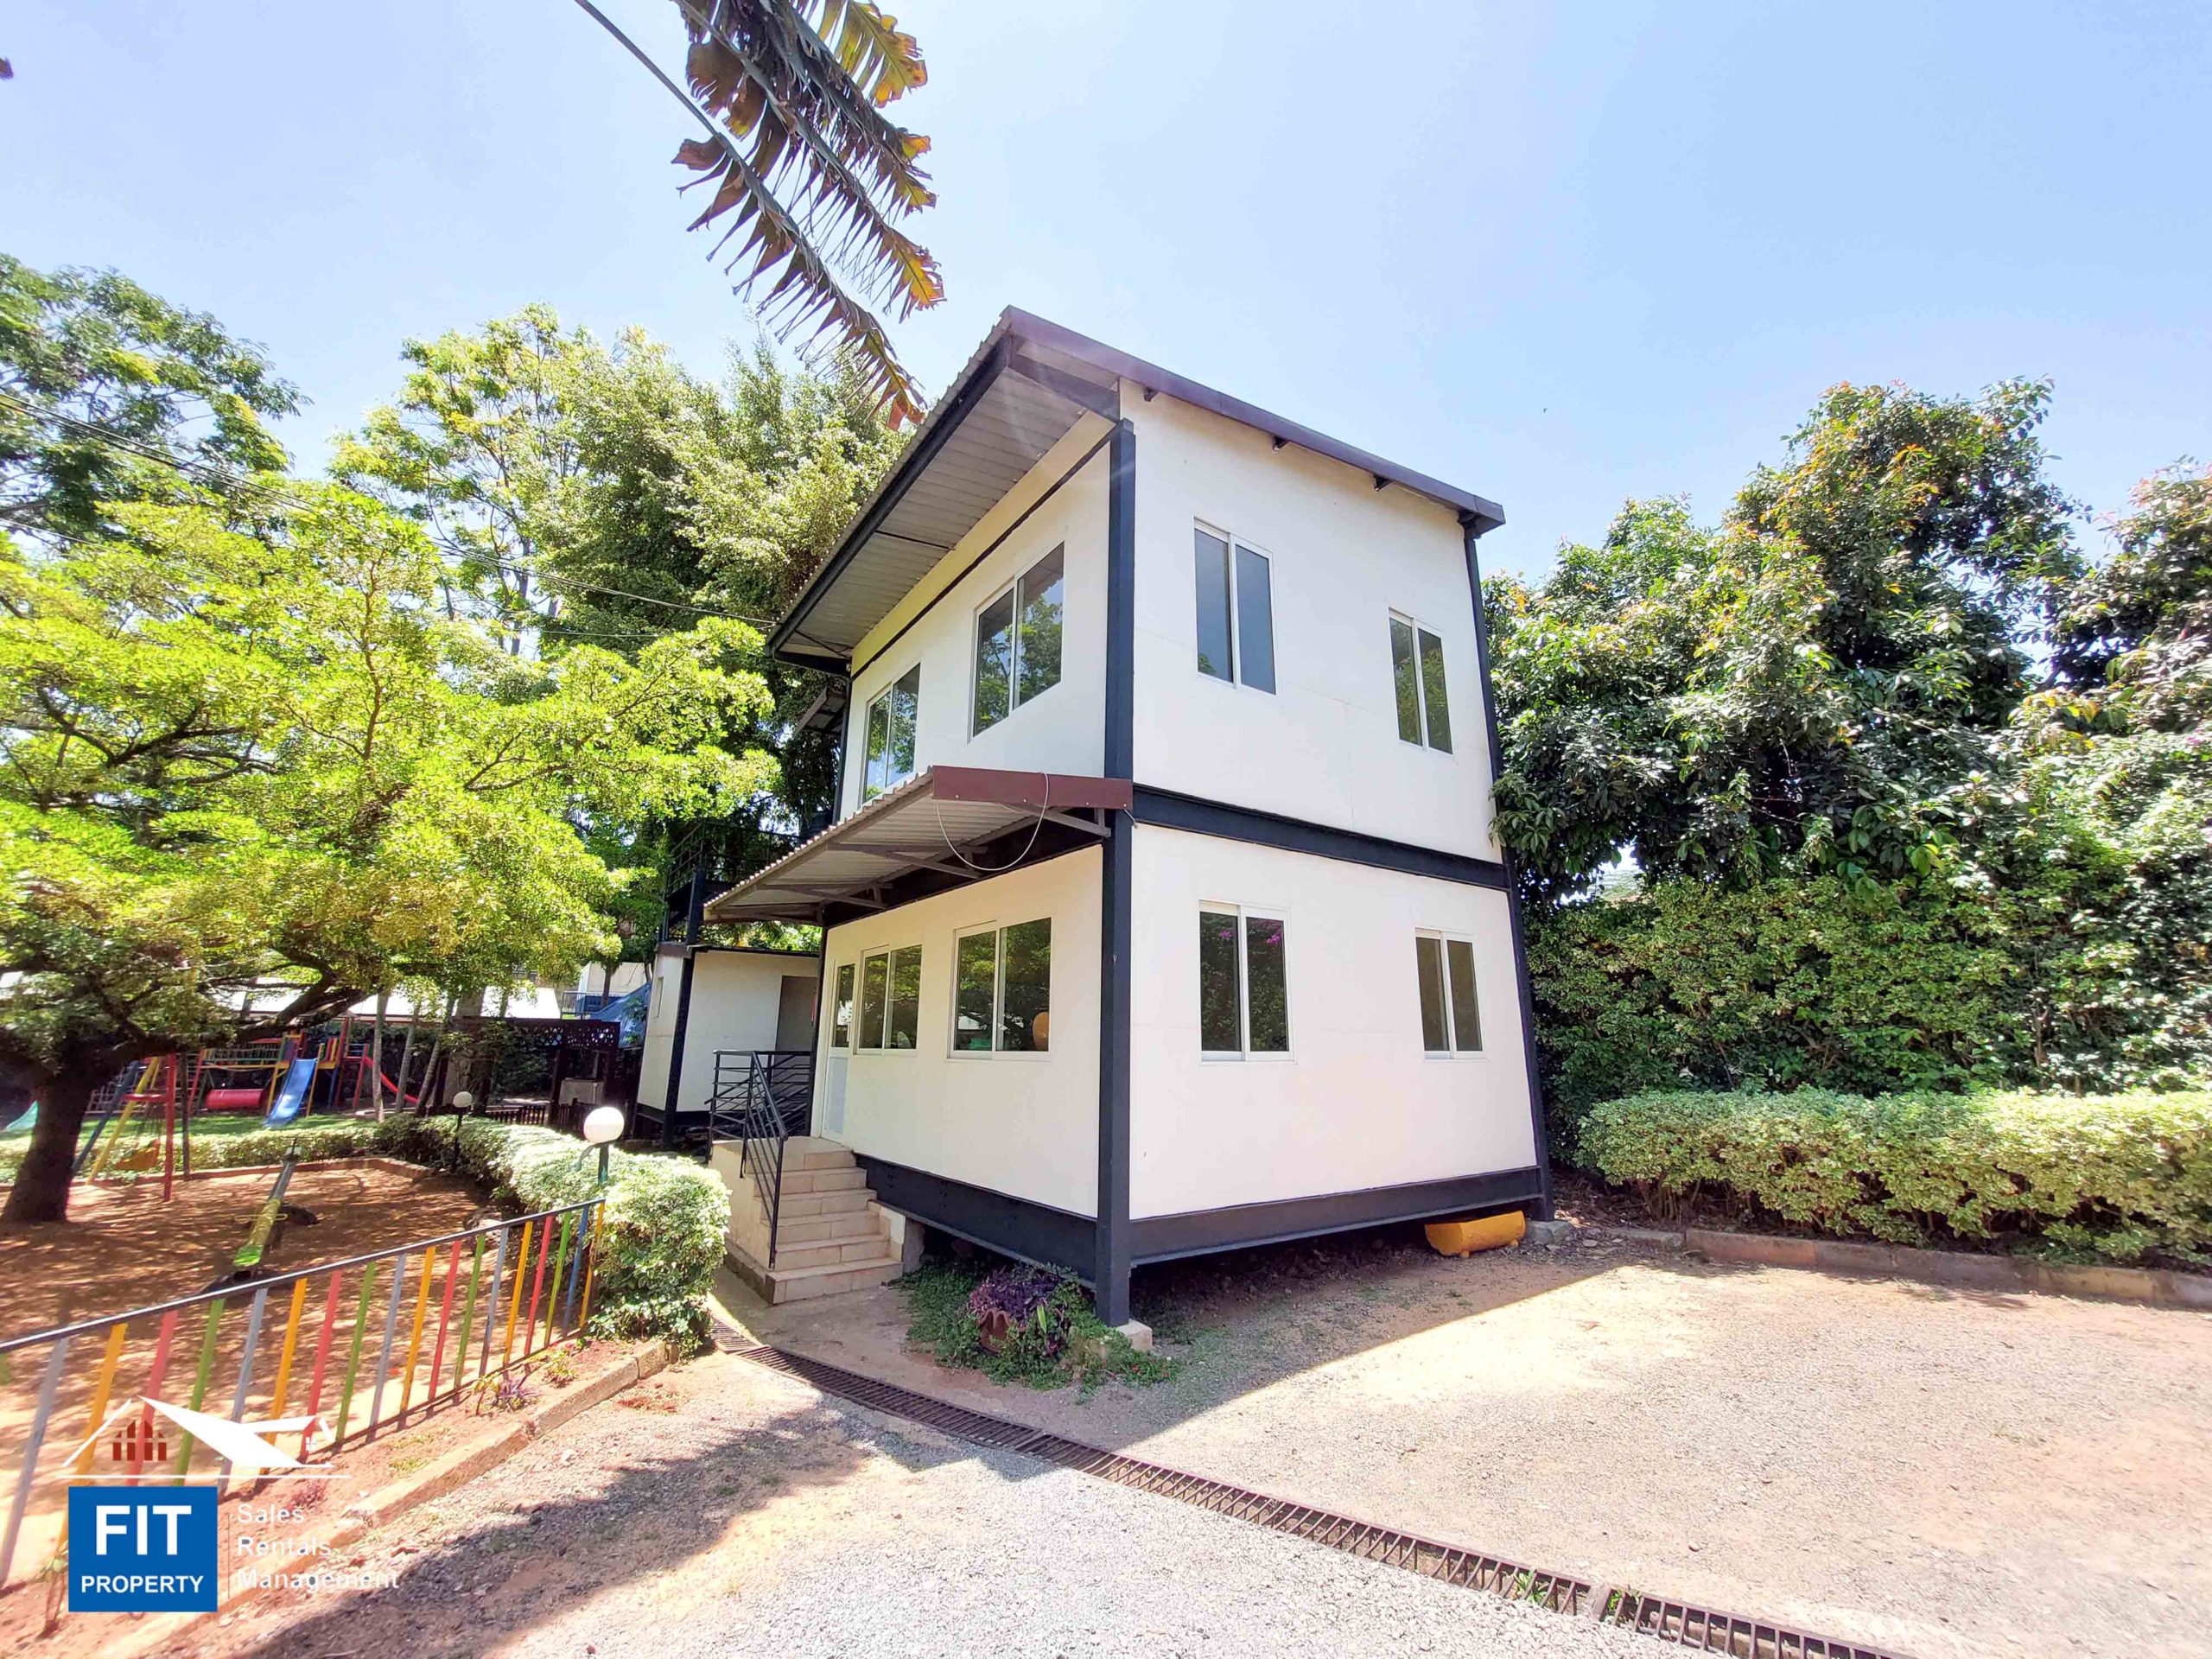 Fully Equipped Montessori School for Sale in the Heart of Gigiri, Nairobi! Near the UN, American Embassy, and various NGOs. Price 150M FIT Property